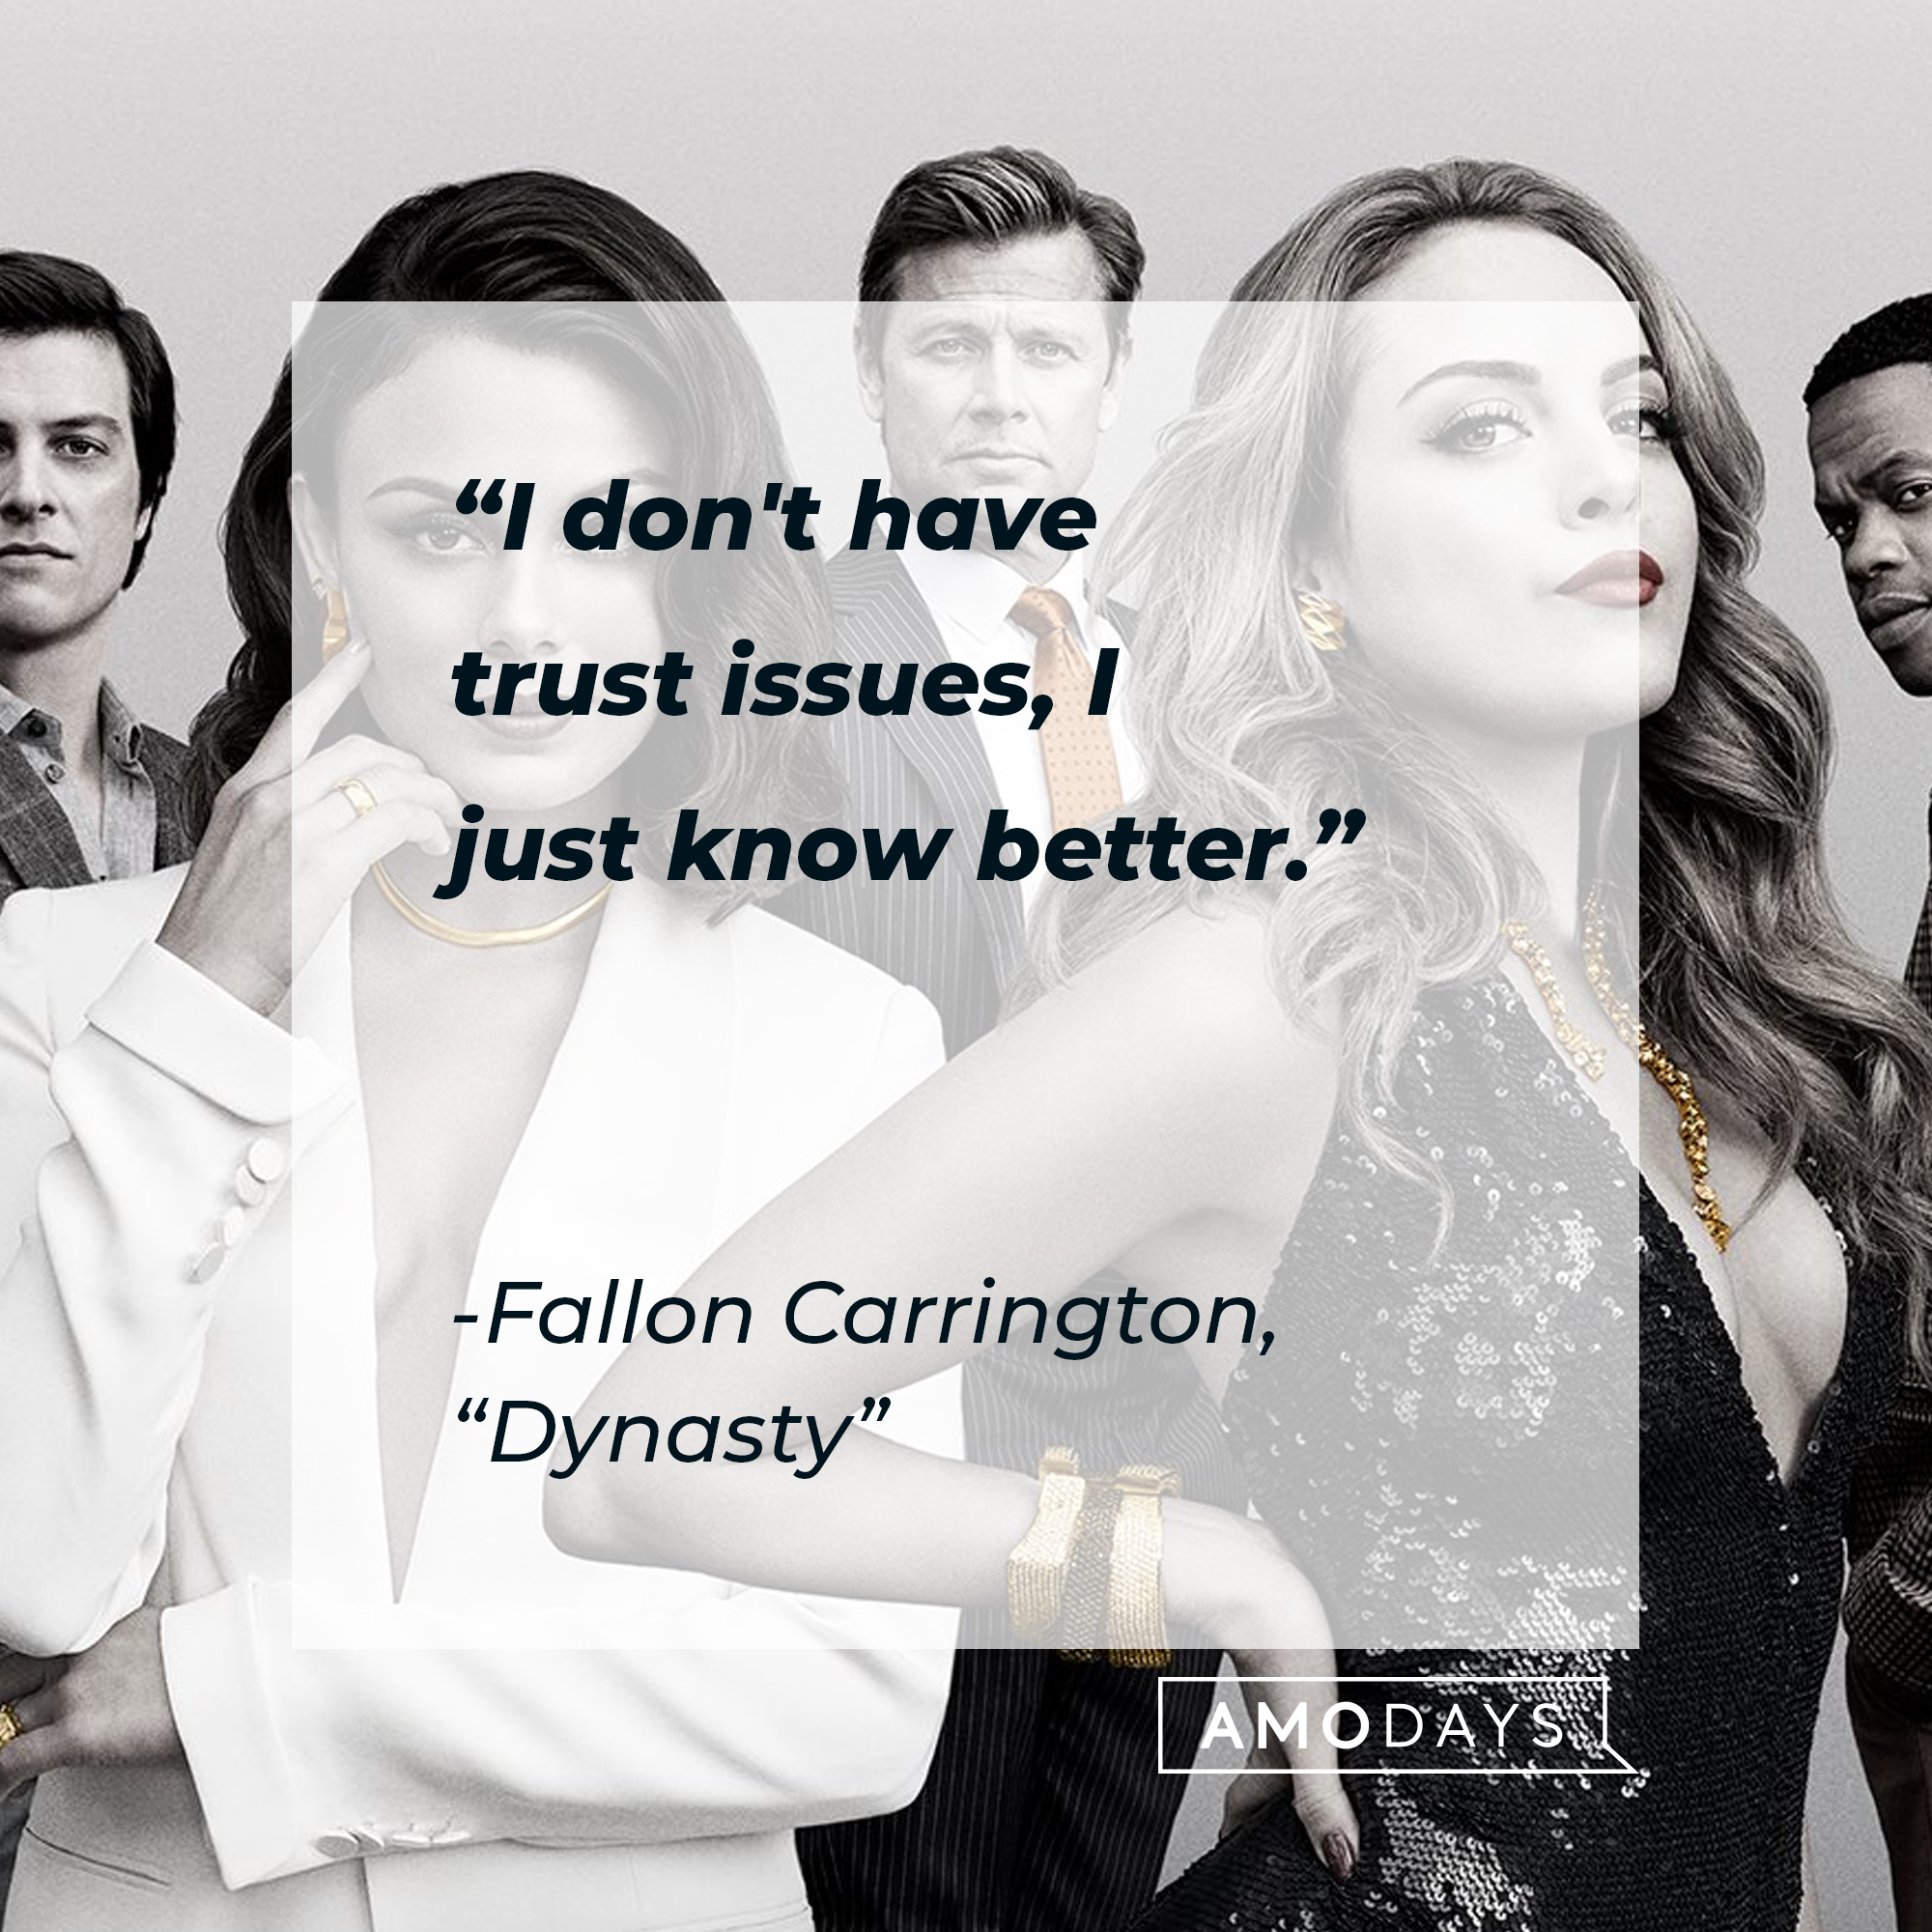 Fallon Carrington’s quote from “Dynasty”: “I don't have trust issues, I just know better.” | Source: facebook.com/DynastyOnTheCW